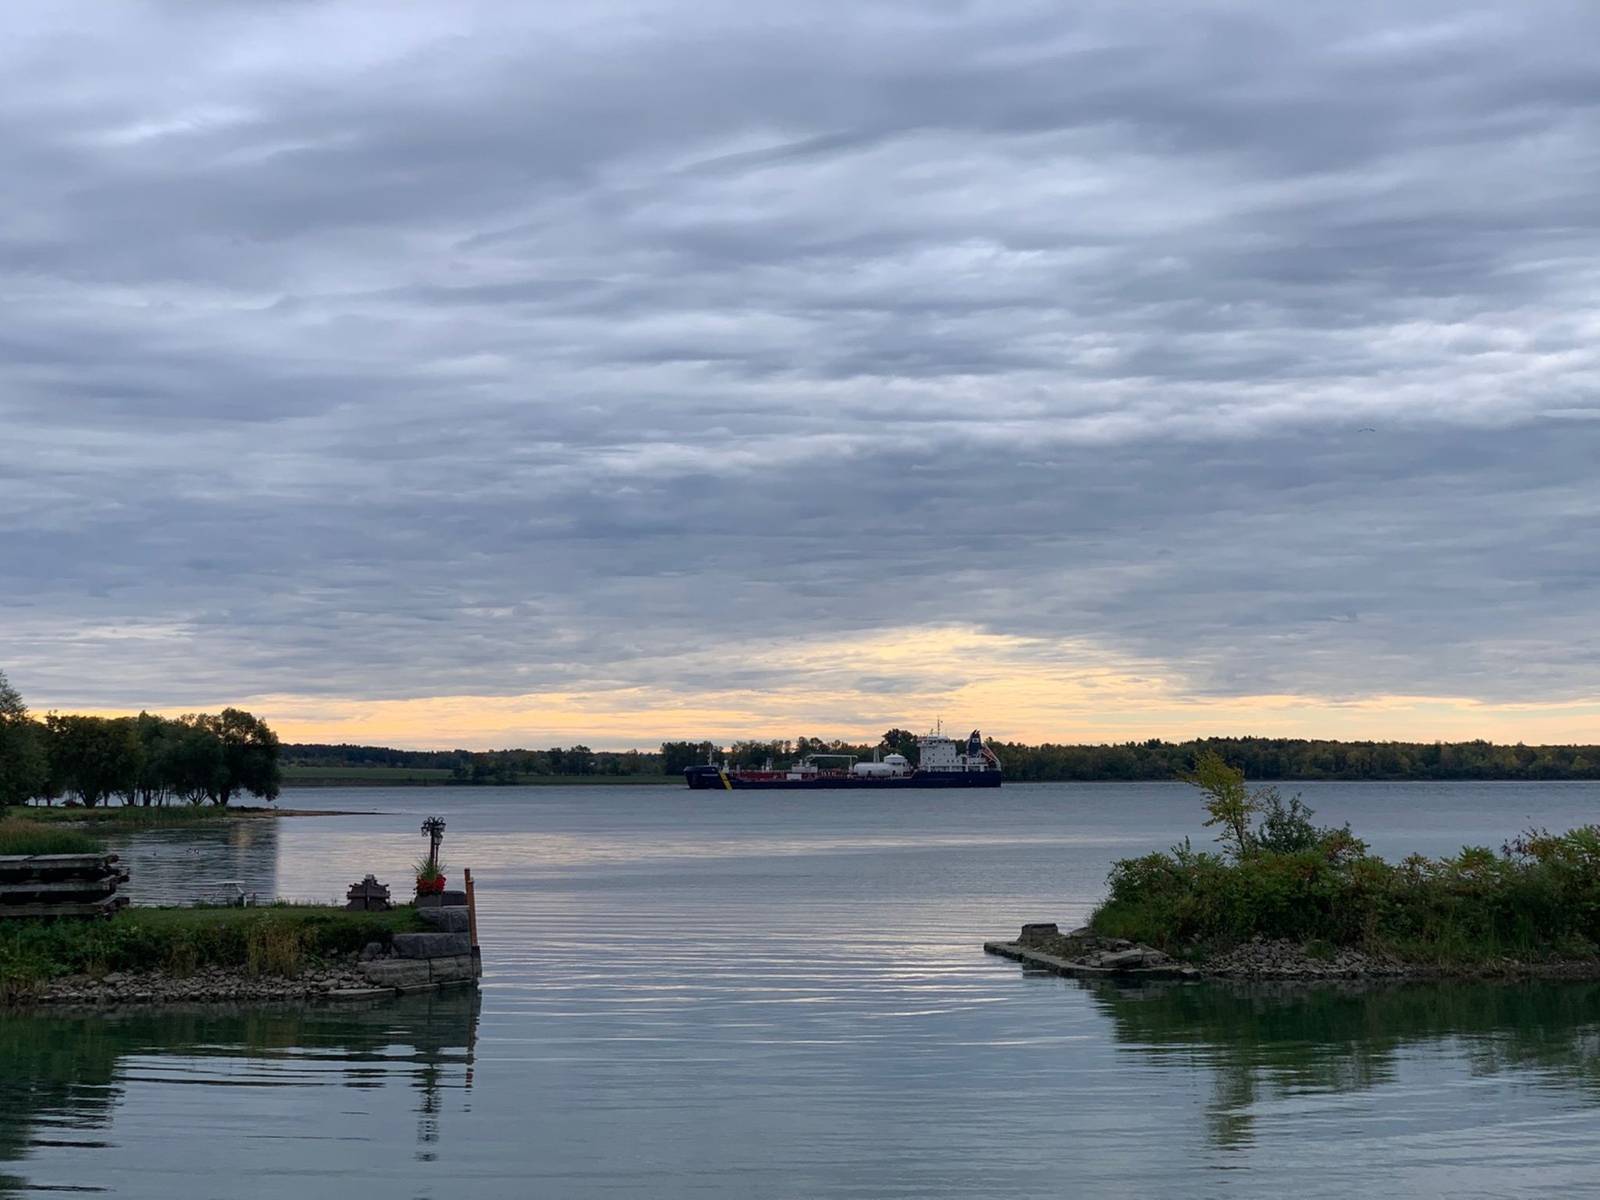 Freighter on the St Lawrence river